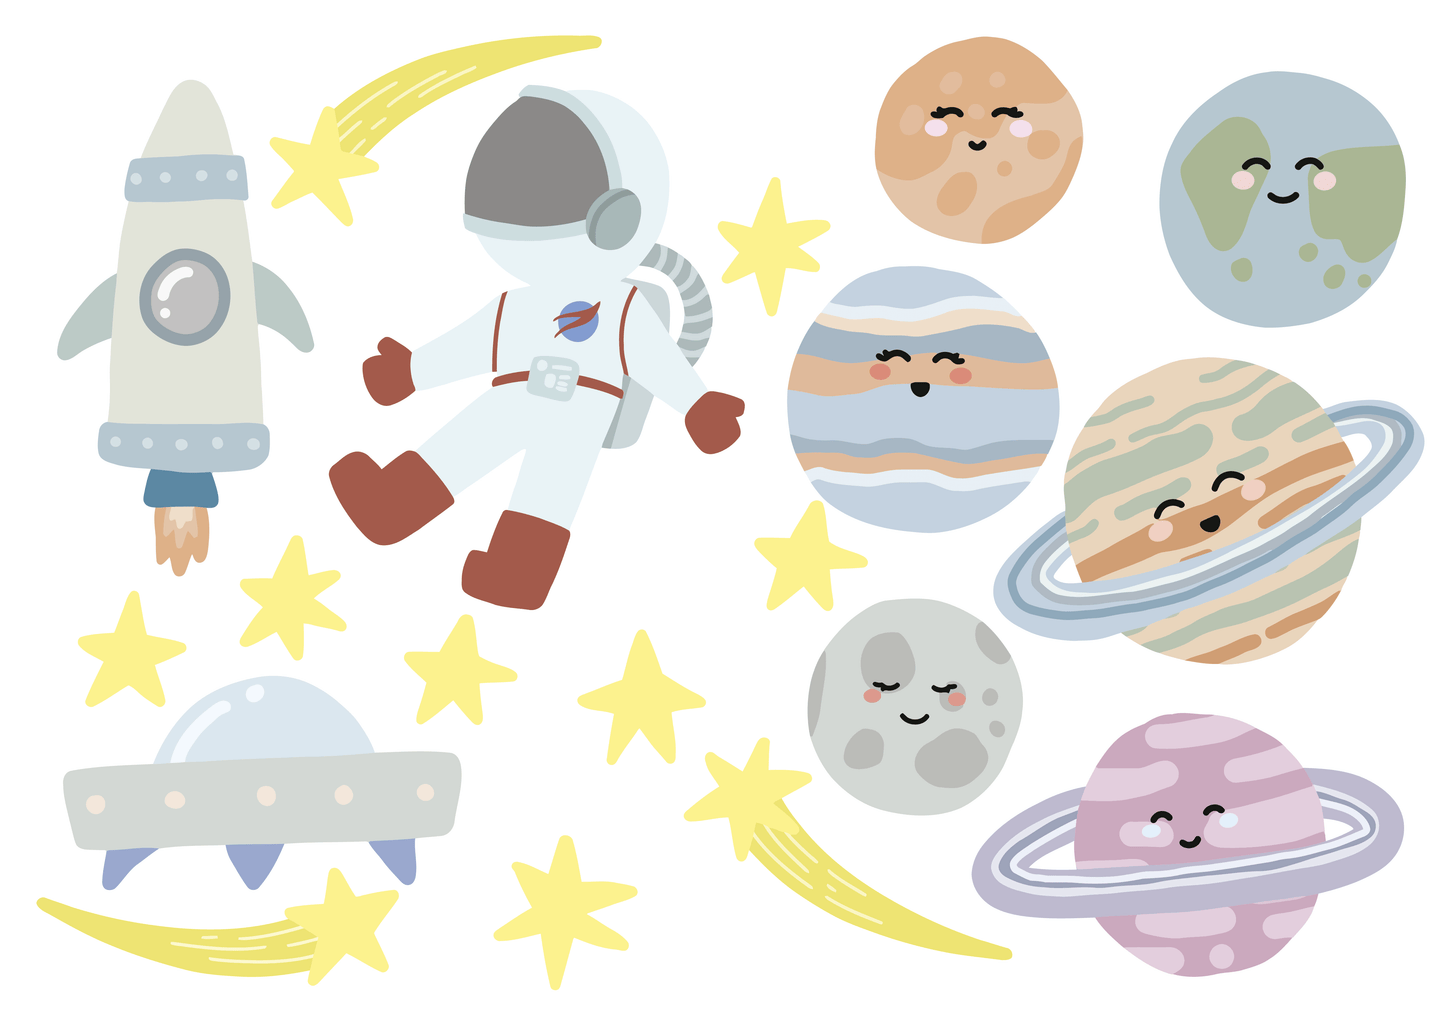 Cosmic Planets Wall Stickers